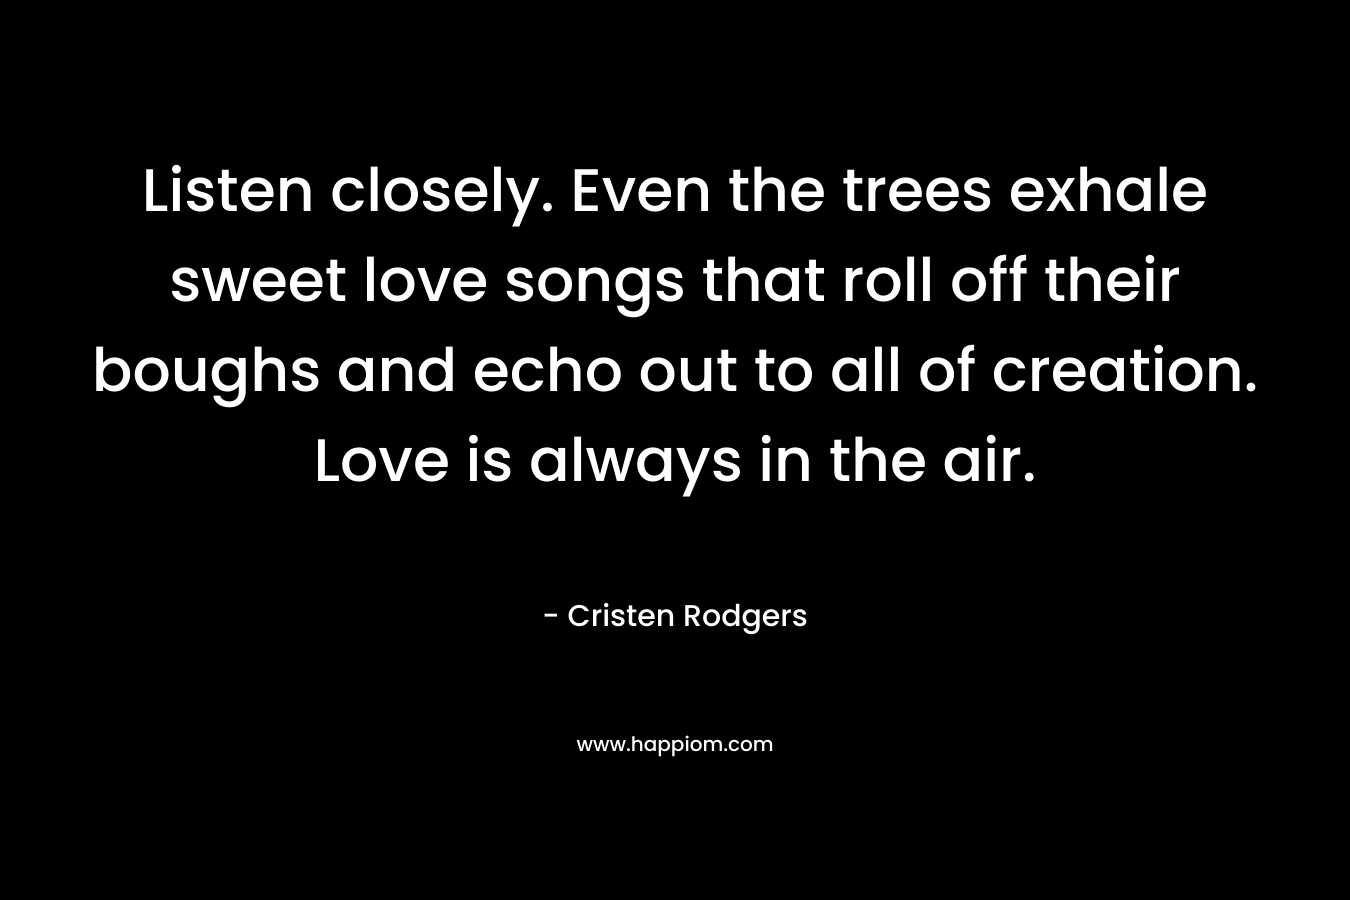 Listen closely. Even the trees exhale sweet love songs that roll off their boughs and echo out to all of creation. Love is always in the air.